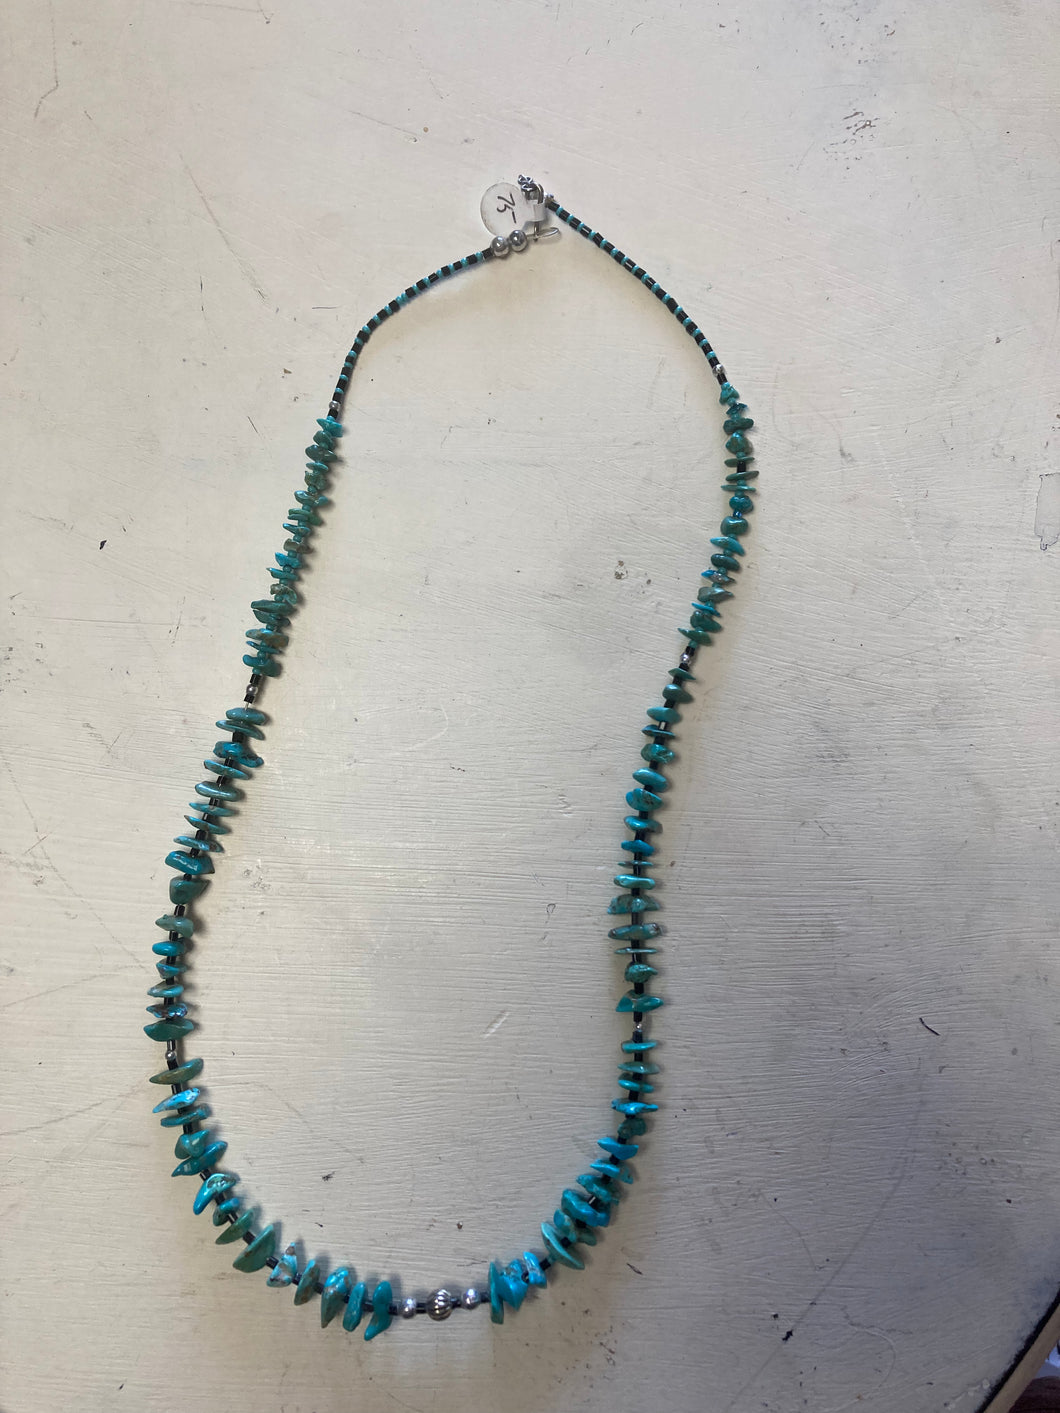 Turquoise necklace with silver ornaments